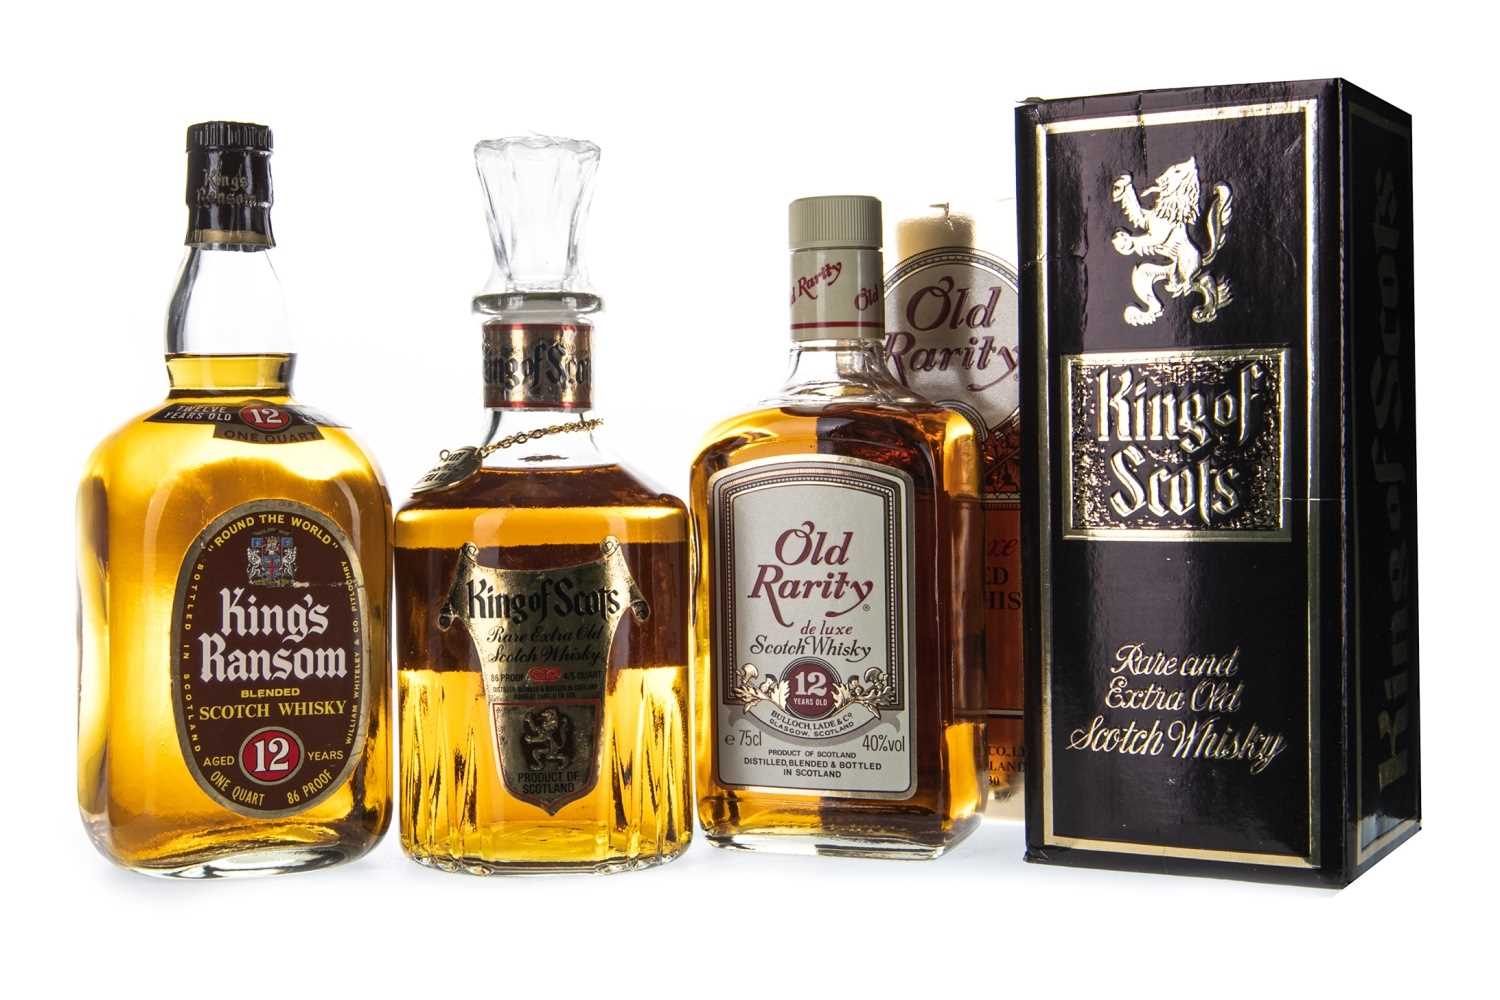 Lot 416 - KING'S RANSOM AGED 12 YEARS, OLD RARITY 12 YEARS, AND KING OF SCOTS RARE EXTRA OLD